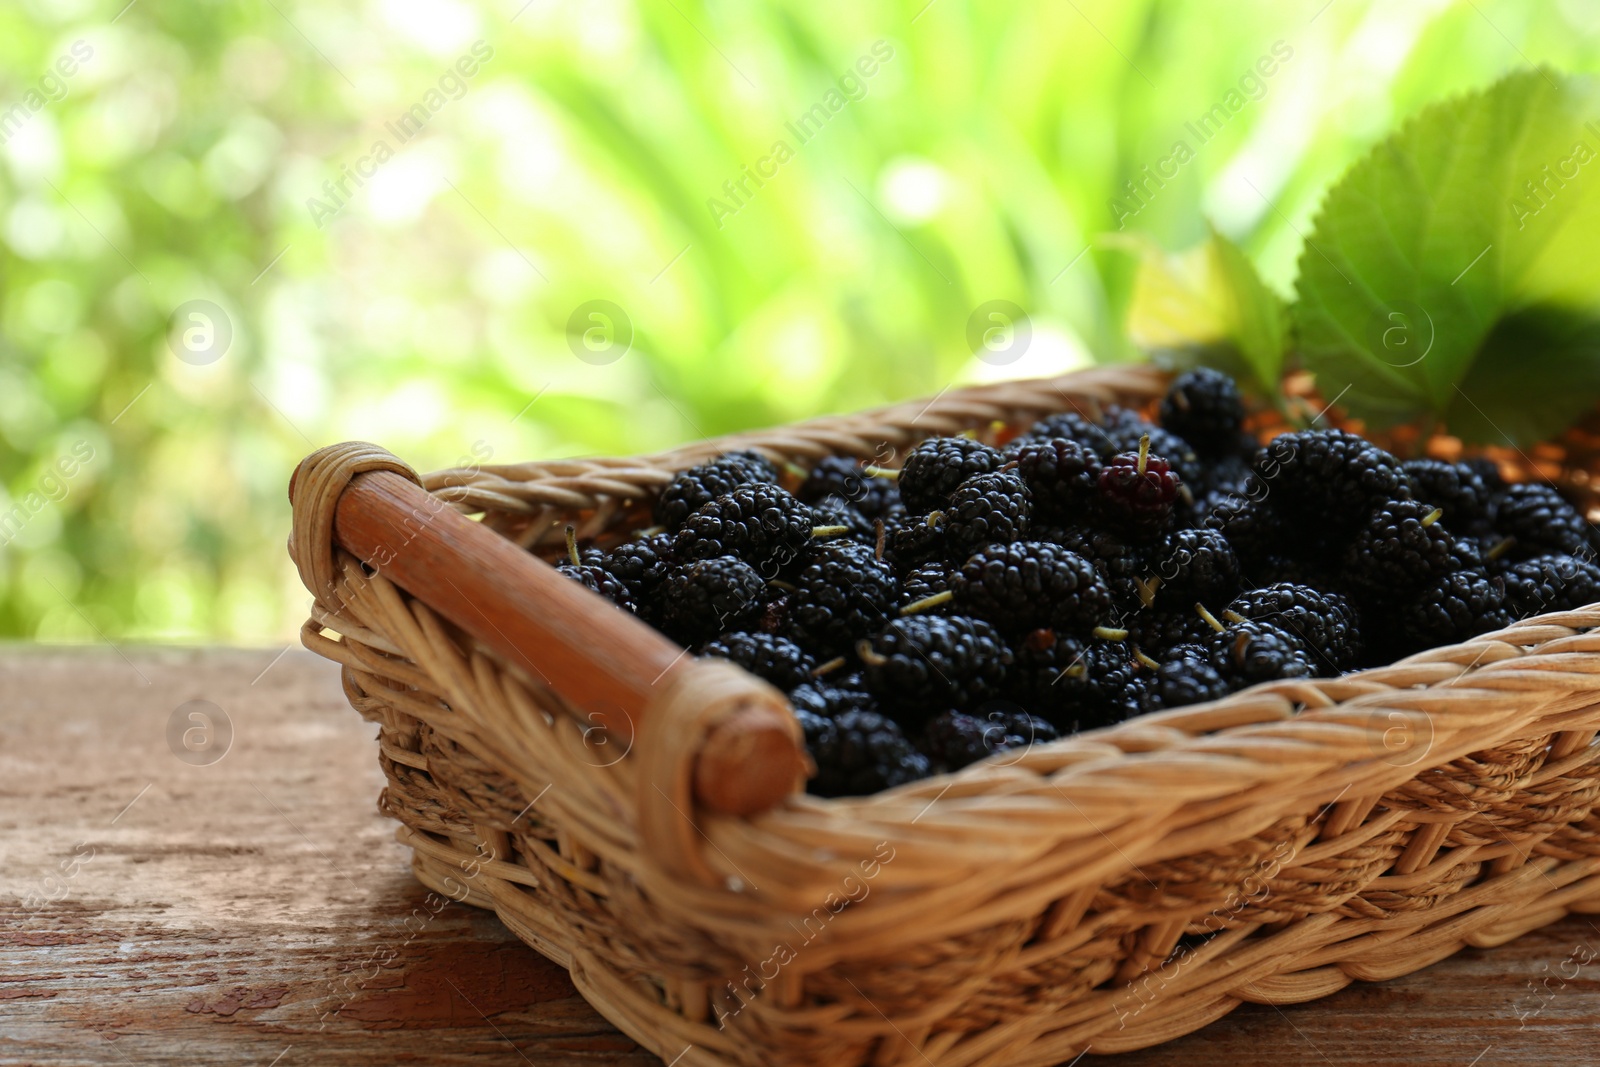 Photo of Wicker basket with delicious ripe black mulberries on wooden table against blurred background